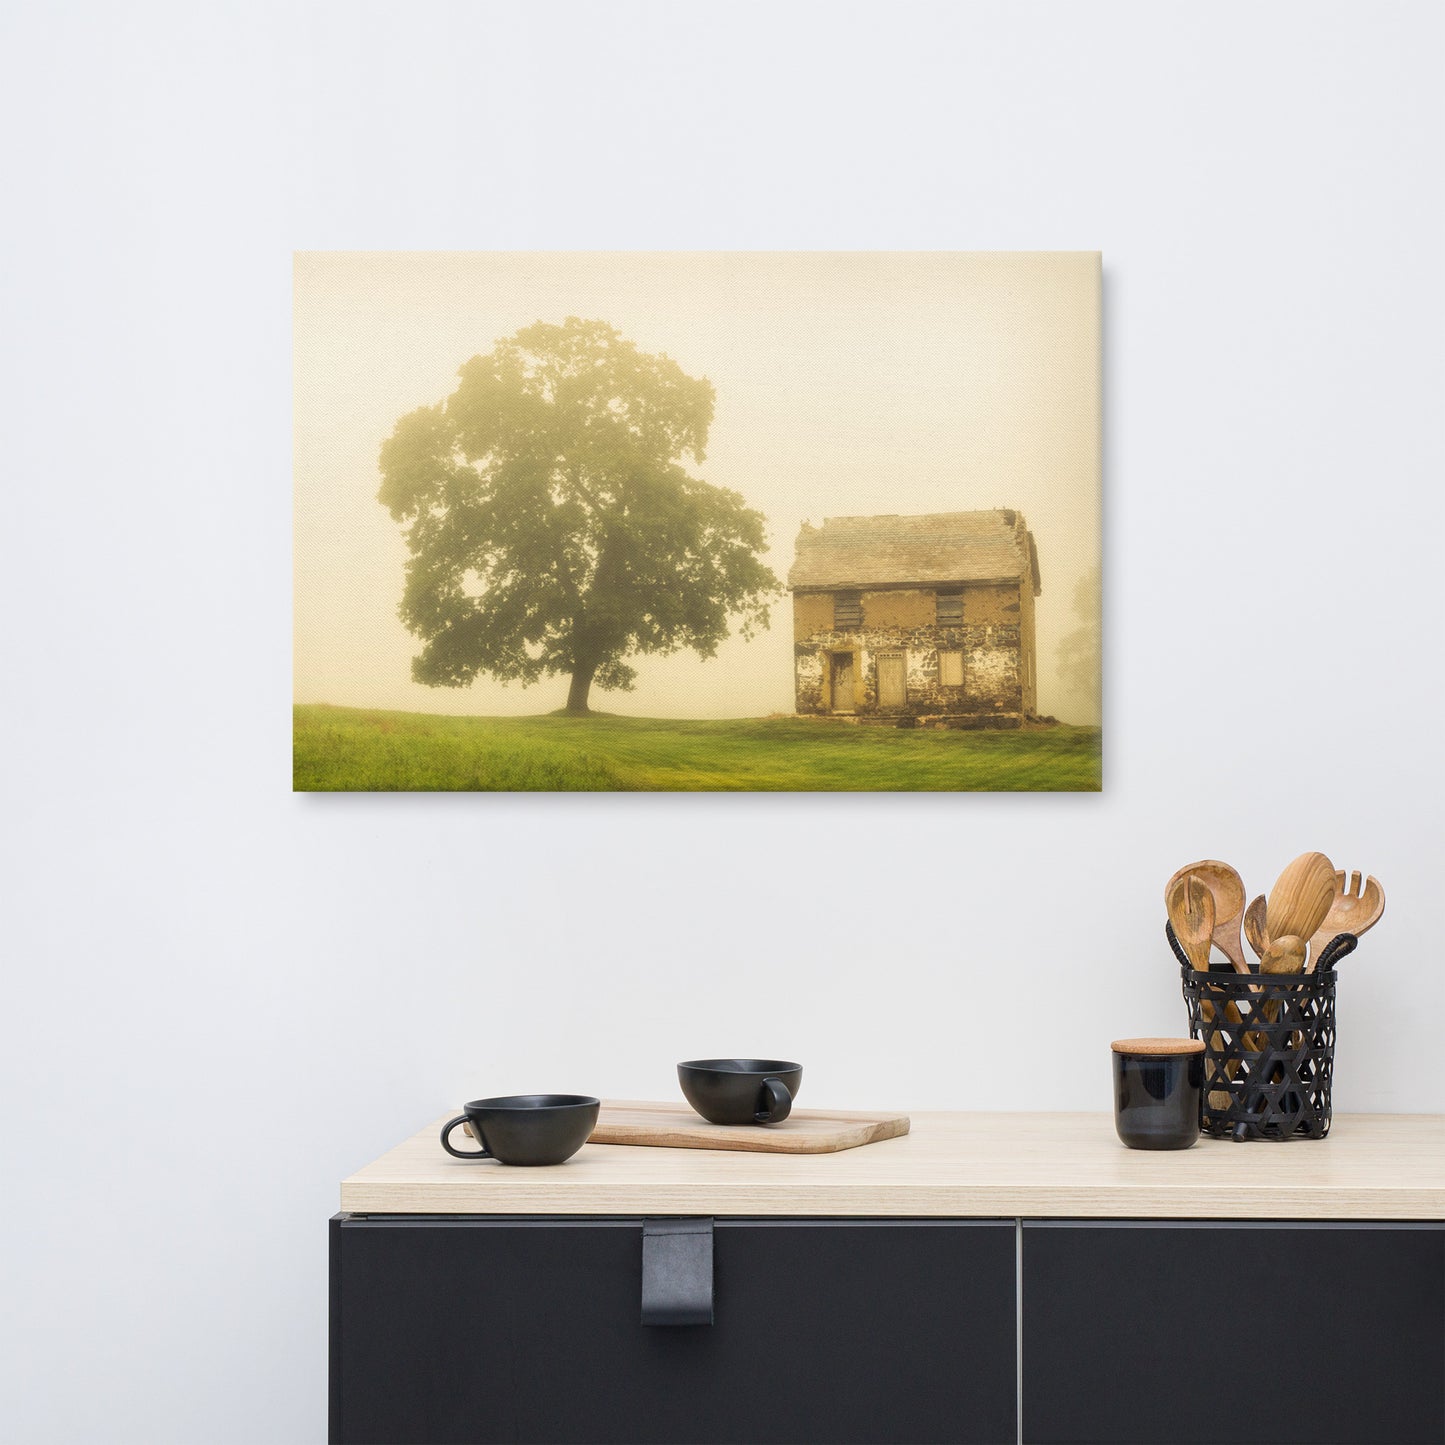 Country Kitchen Wall Pictures: Abandoned House on Adams Dam Rd - Rustic / Rural / Country Style Landscape / Nature Loose / Unframed Photograph Wall Art Print - Artwork